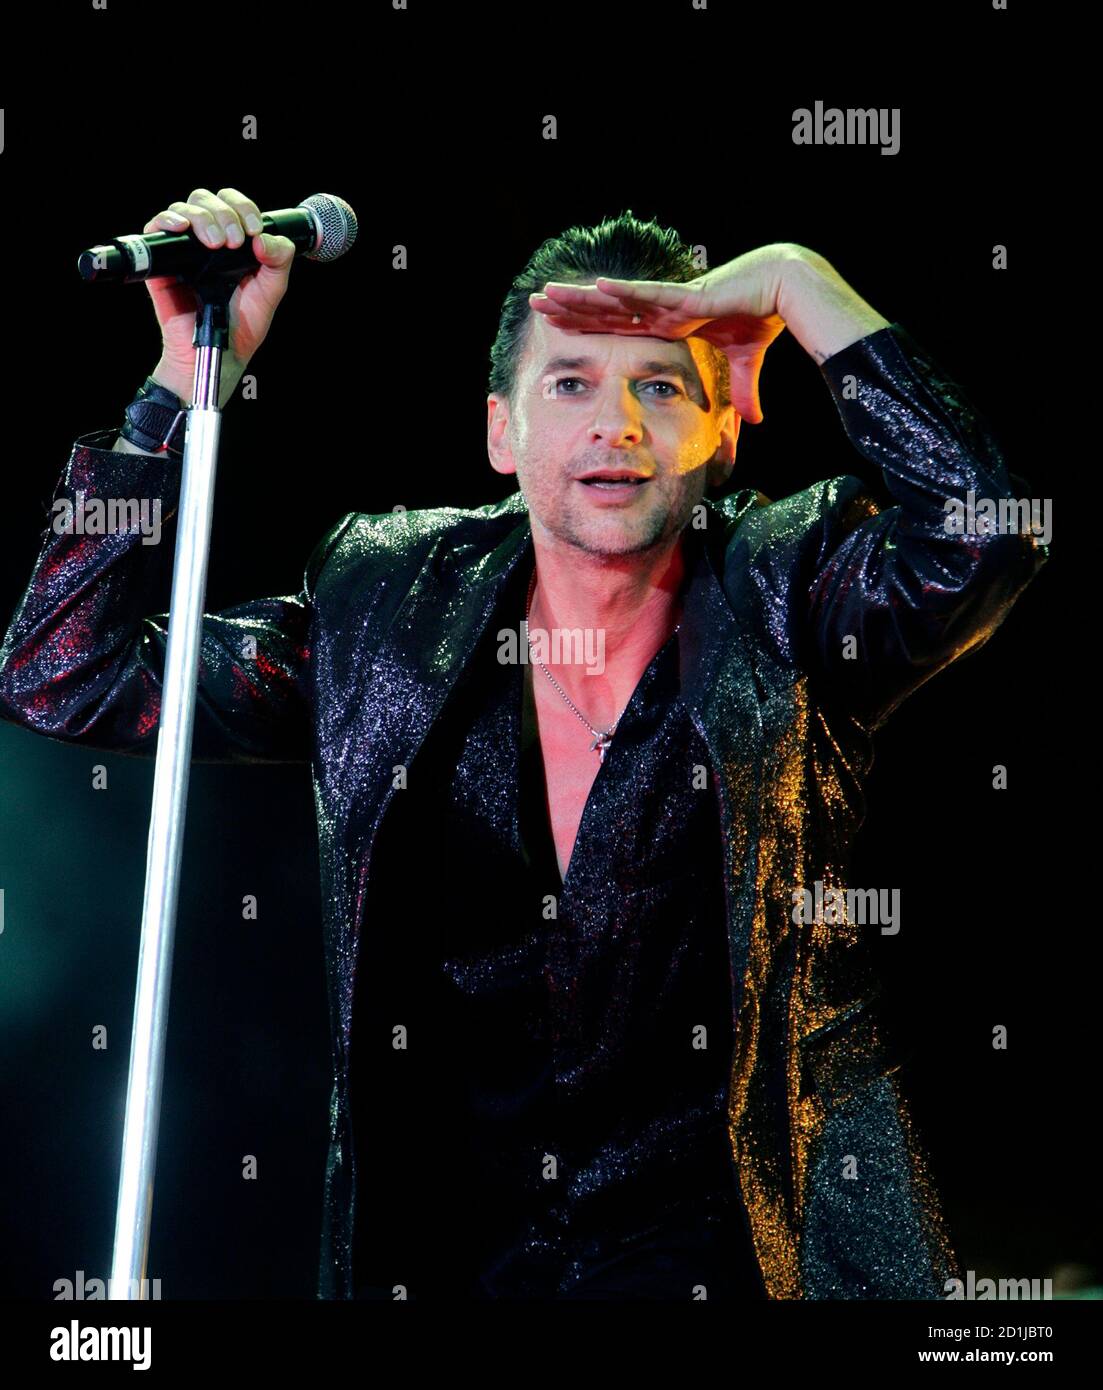 Lead singer for the British band Depeche Mode, Dave Gahan, performs on the  stage during their concert in Budapest June 23,2009. The concert is a part  of the "Tour of the Universe".